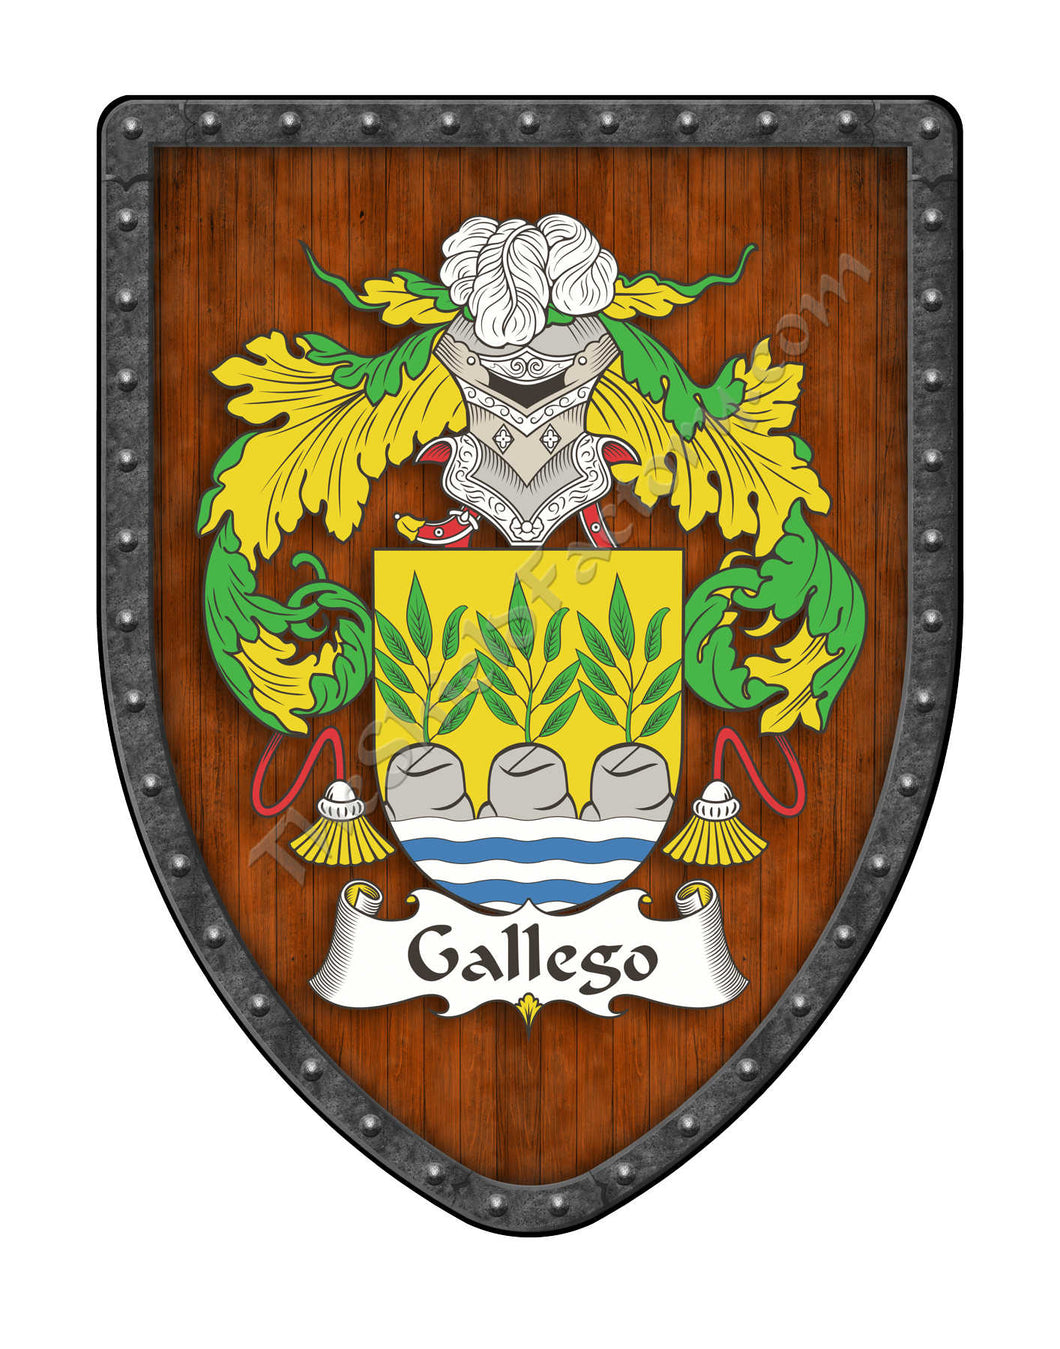 Gallego Coat of Arms Shield